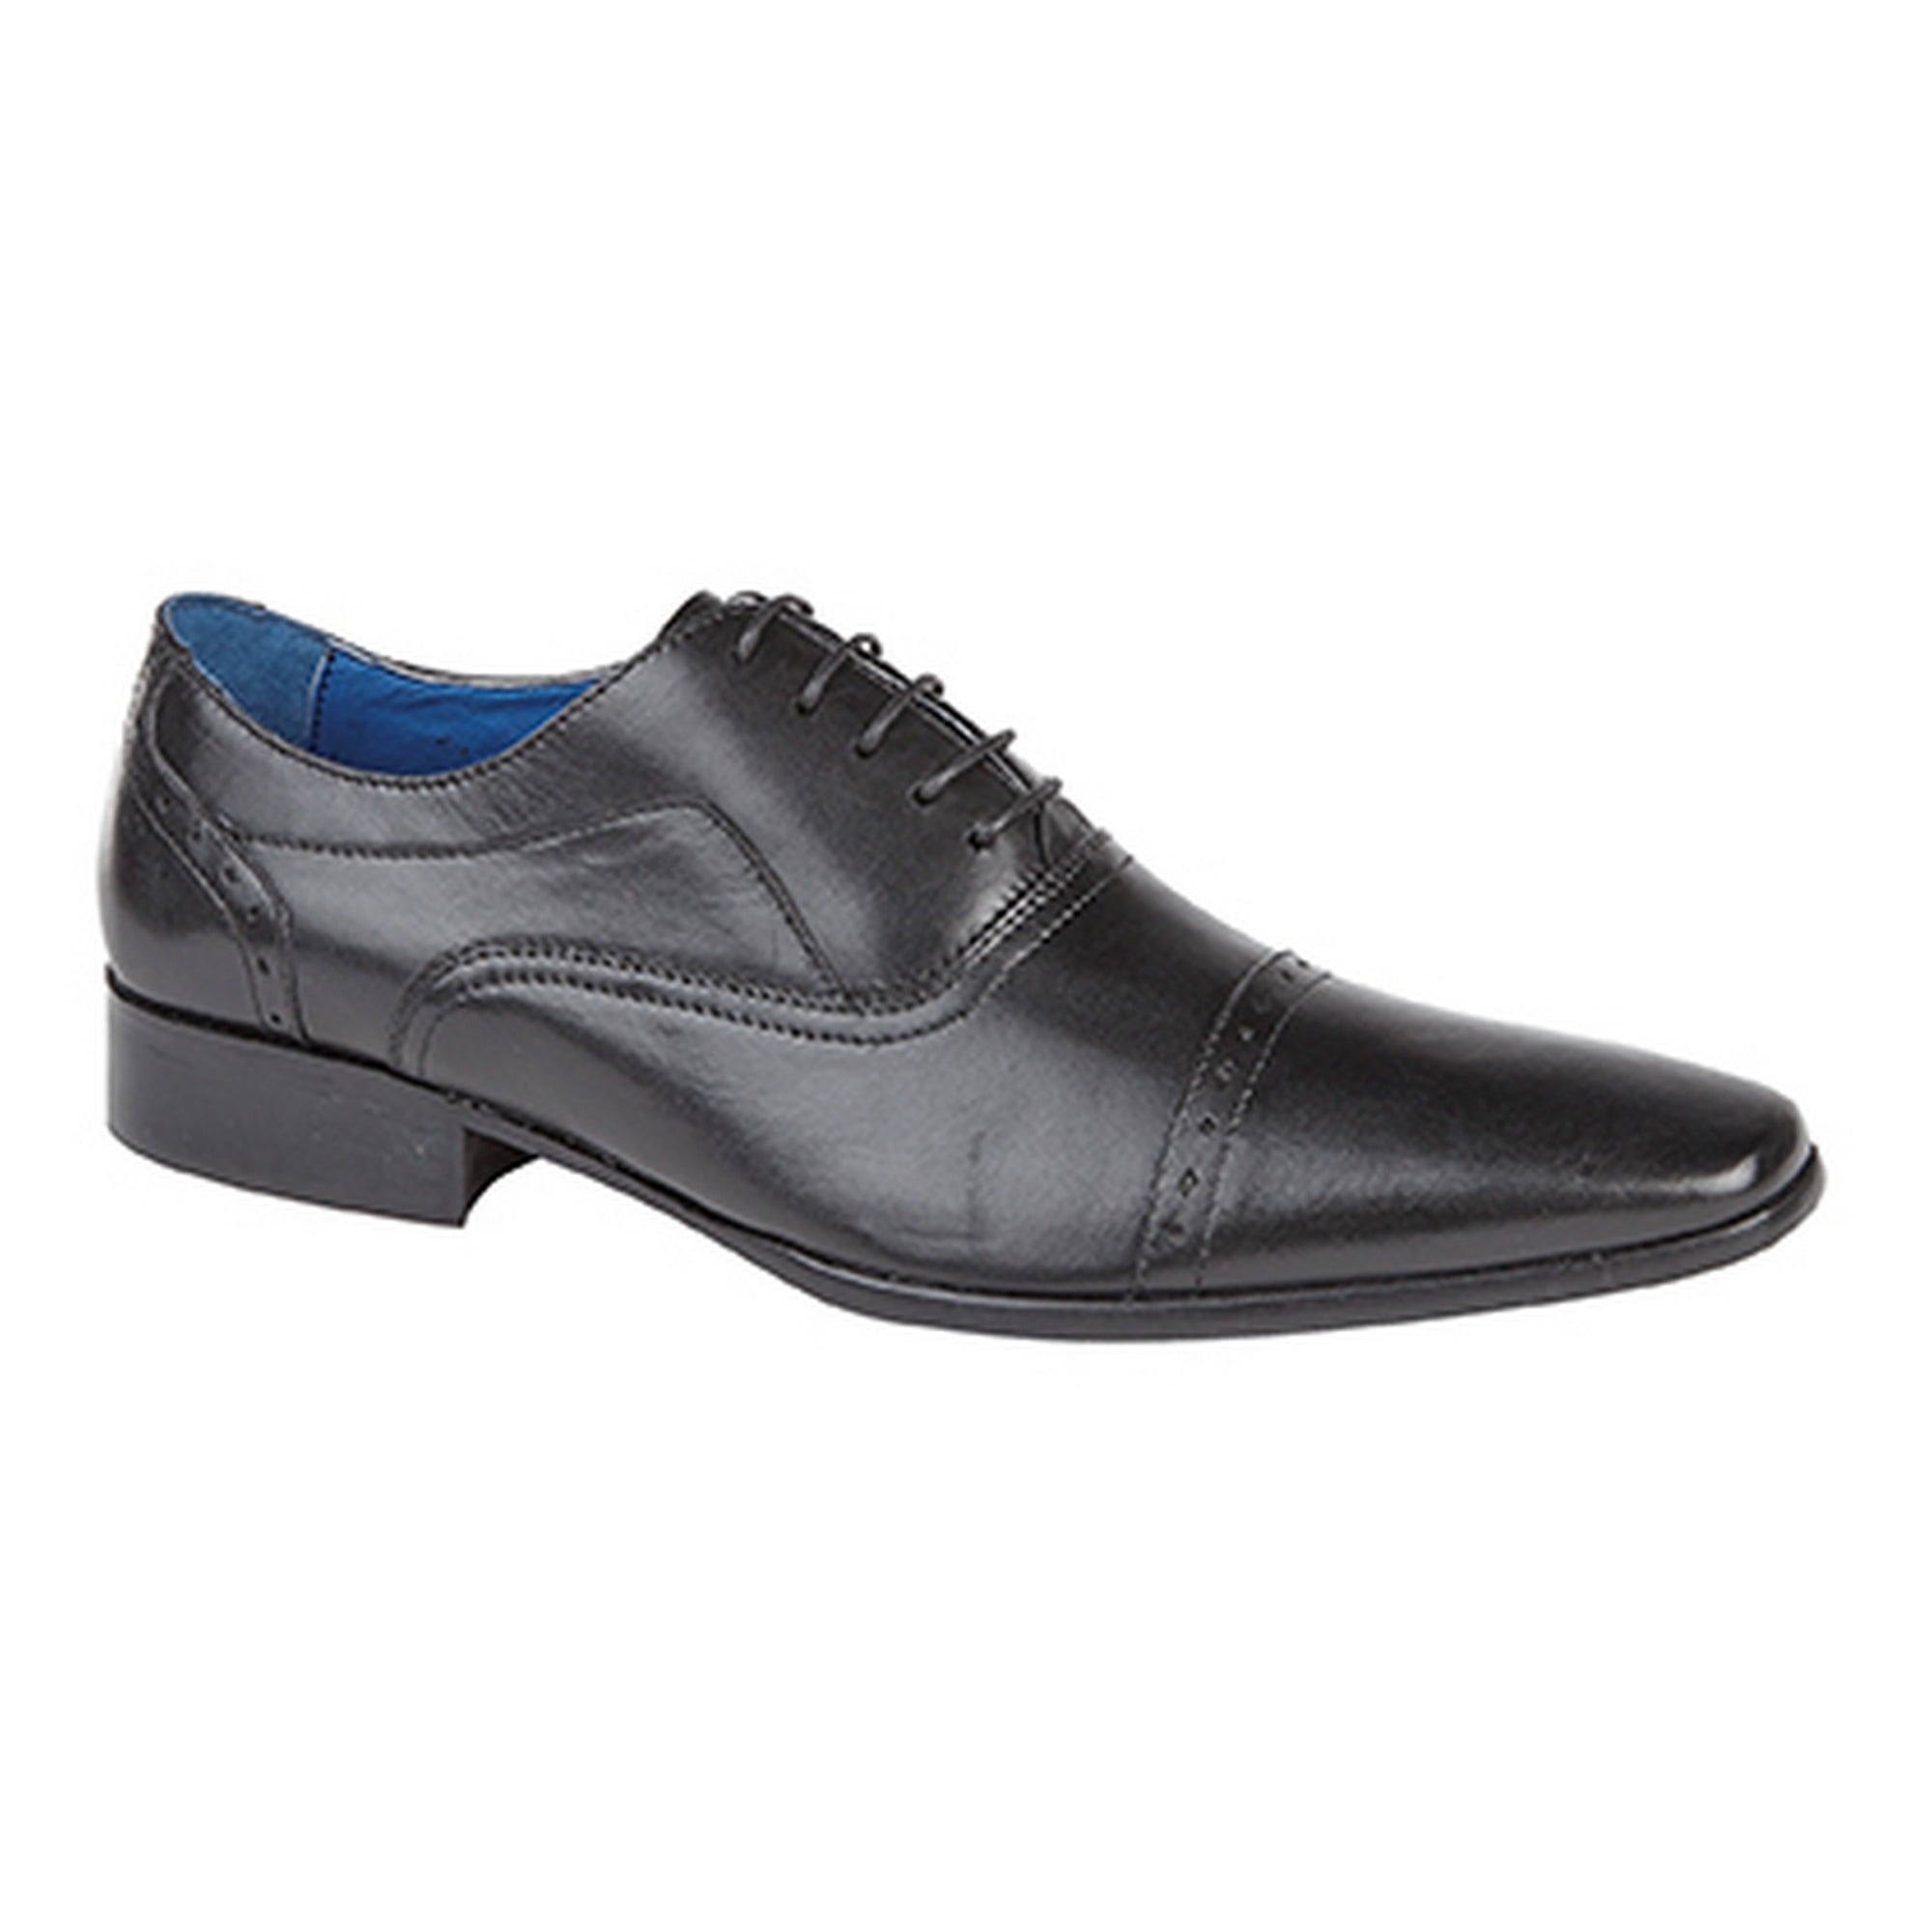 Roamers Classic Men's 5 Eye Punched Cap Oxfords Black Leather Formal Shoes 